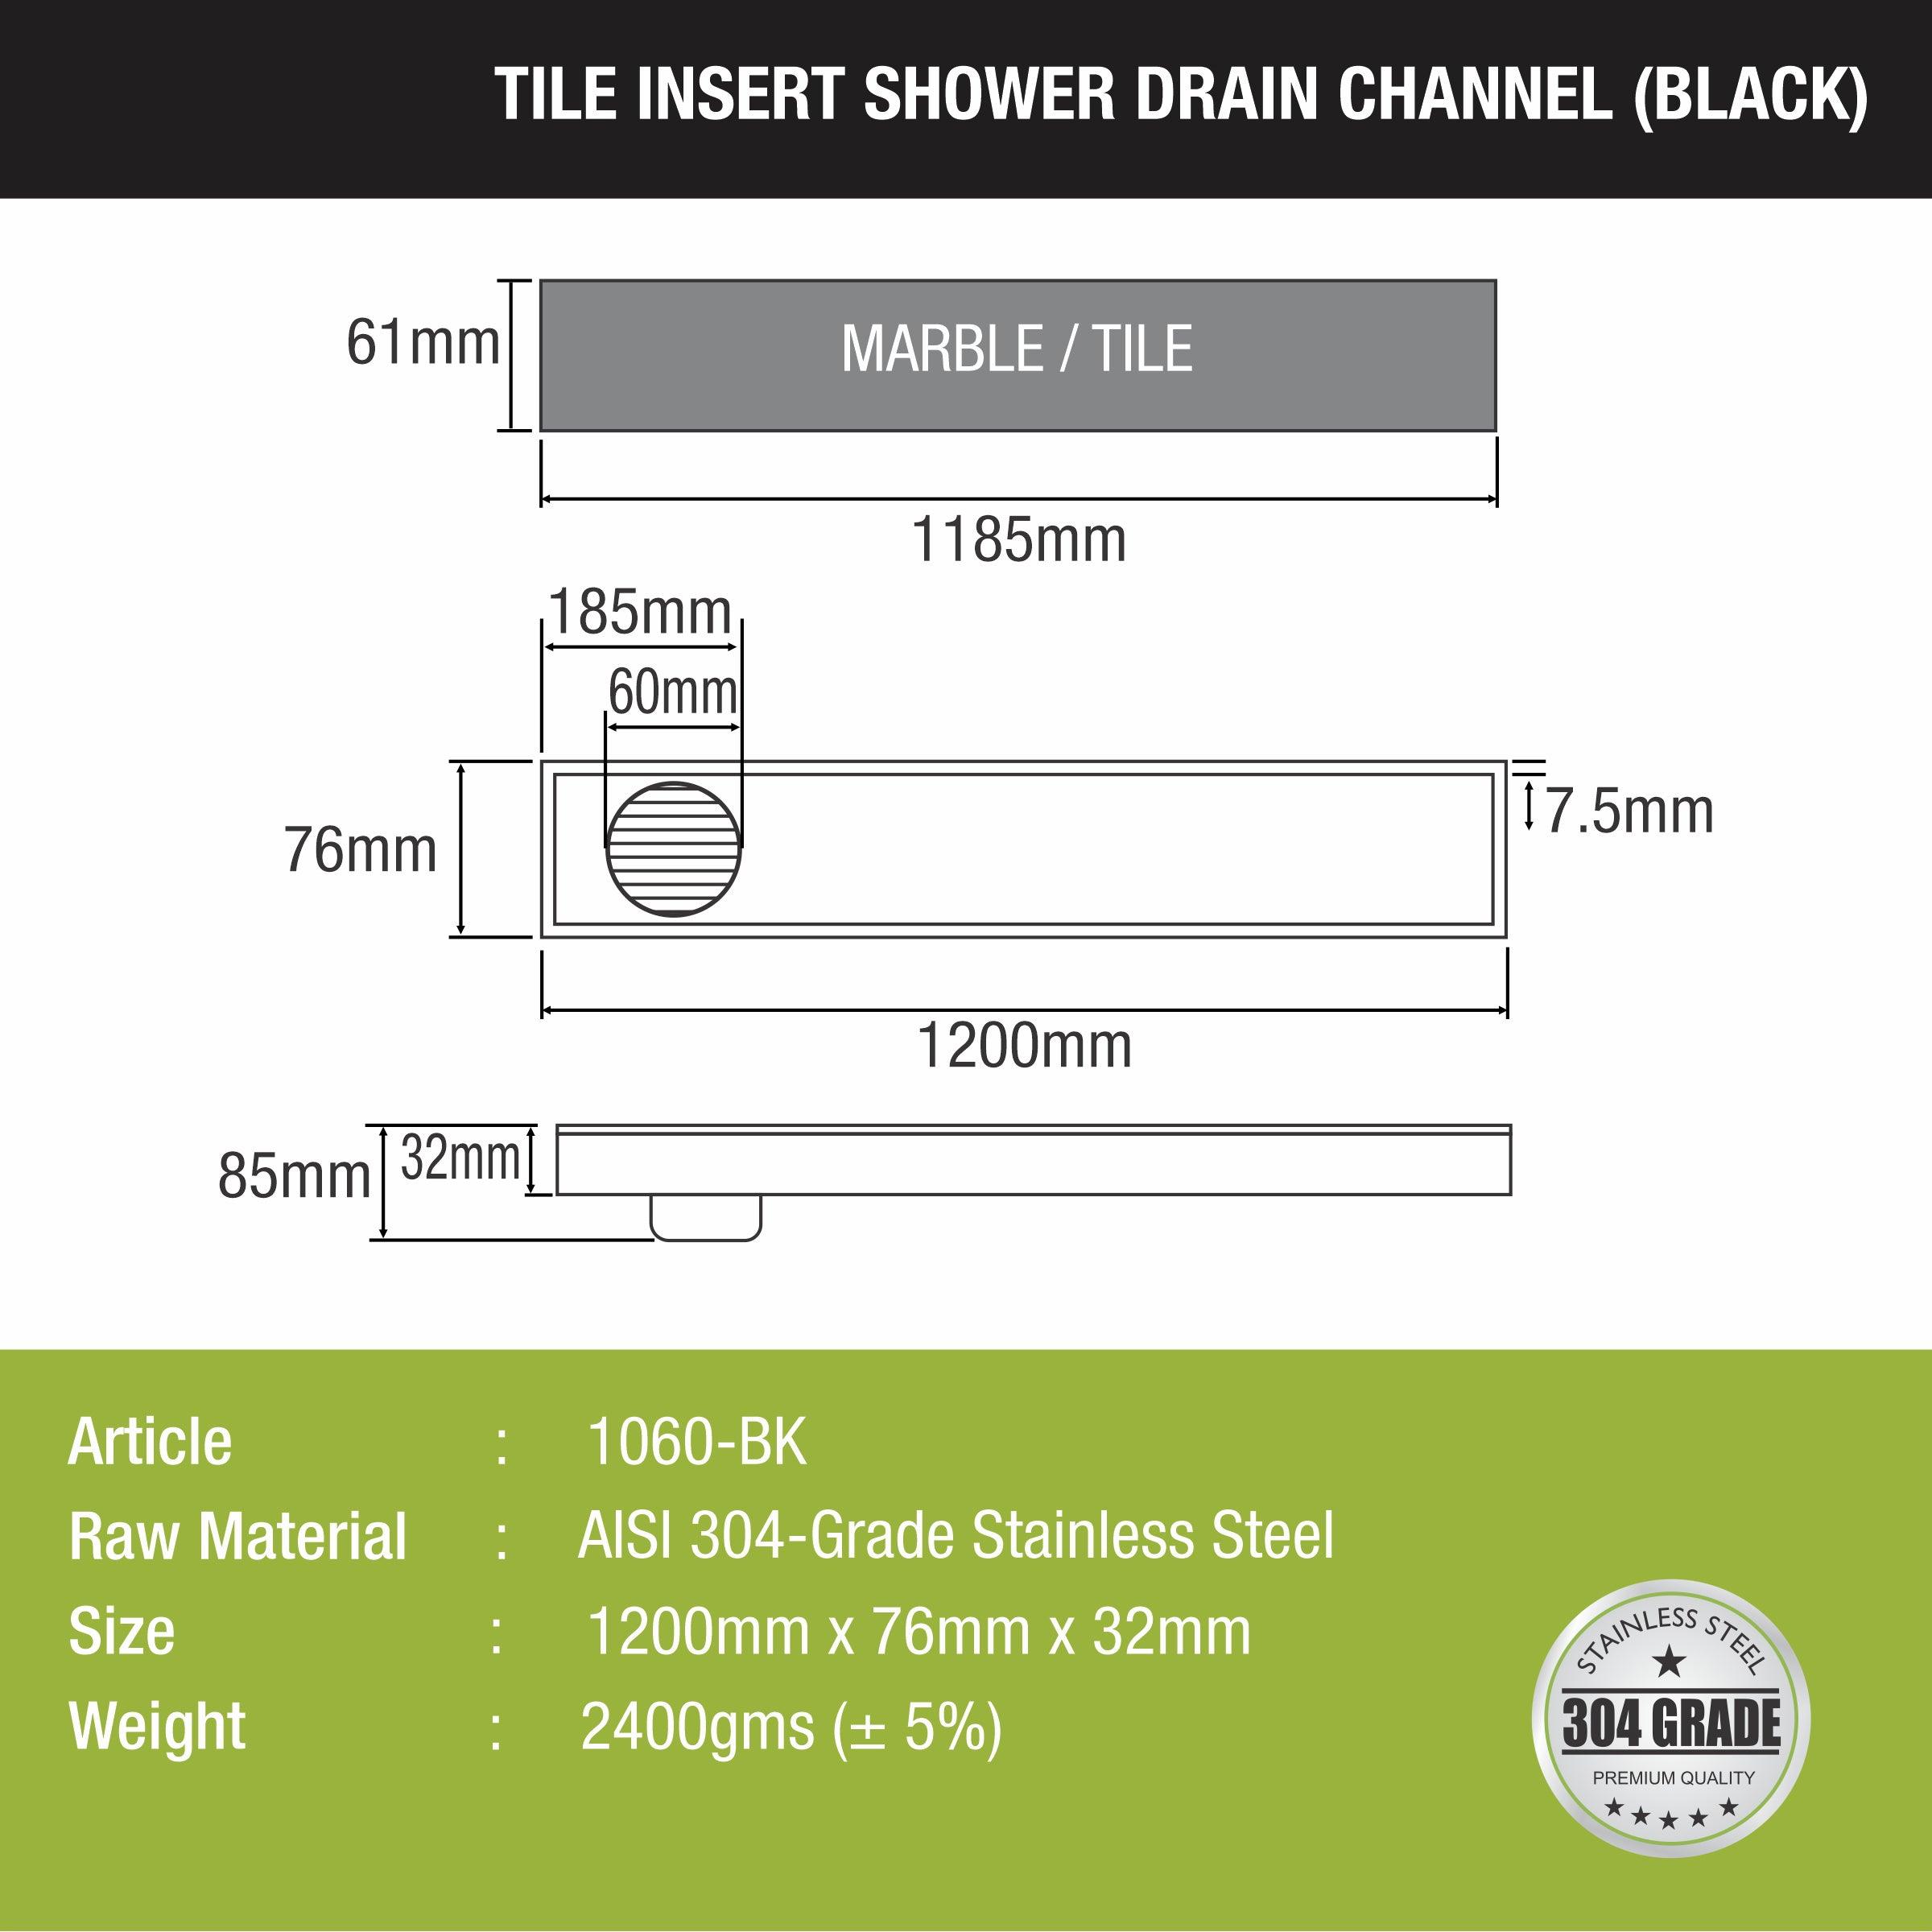 Tile Insert Shower Drain Channel - Black (48 x 3 Inches) size and measurement